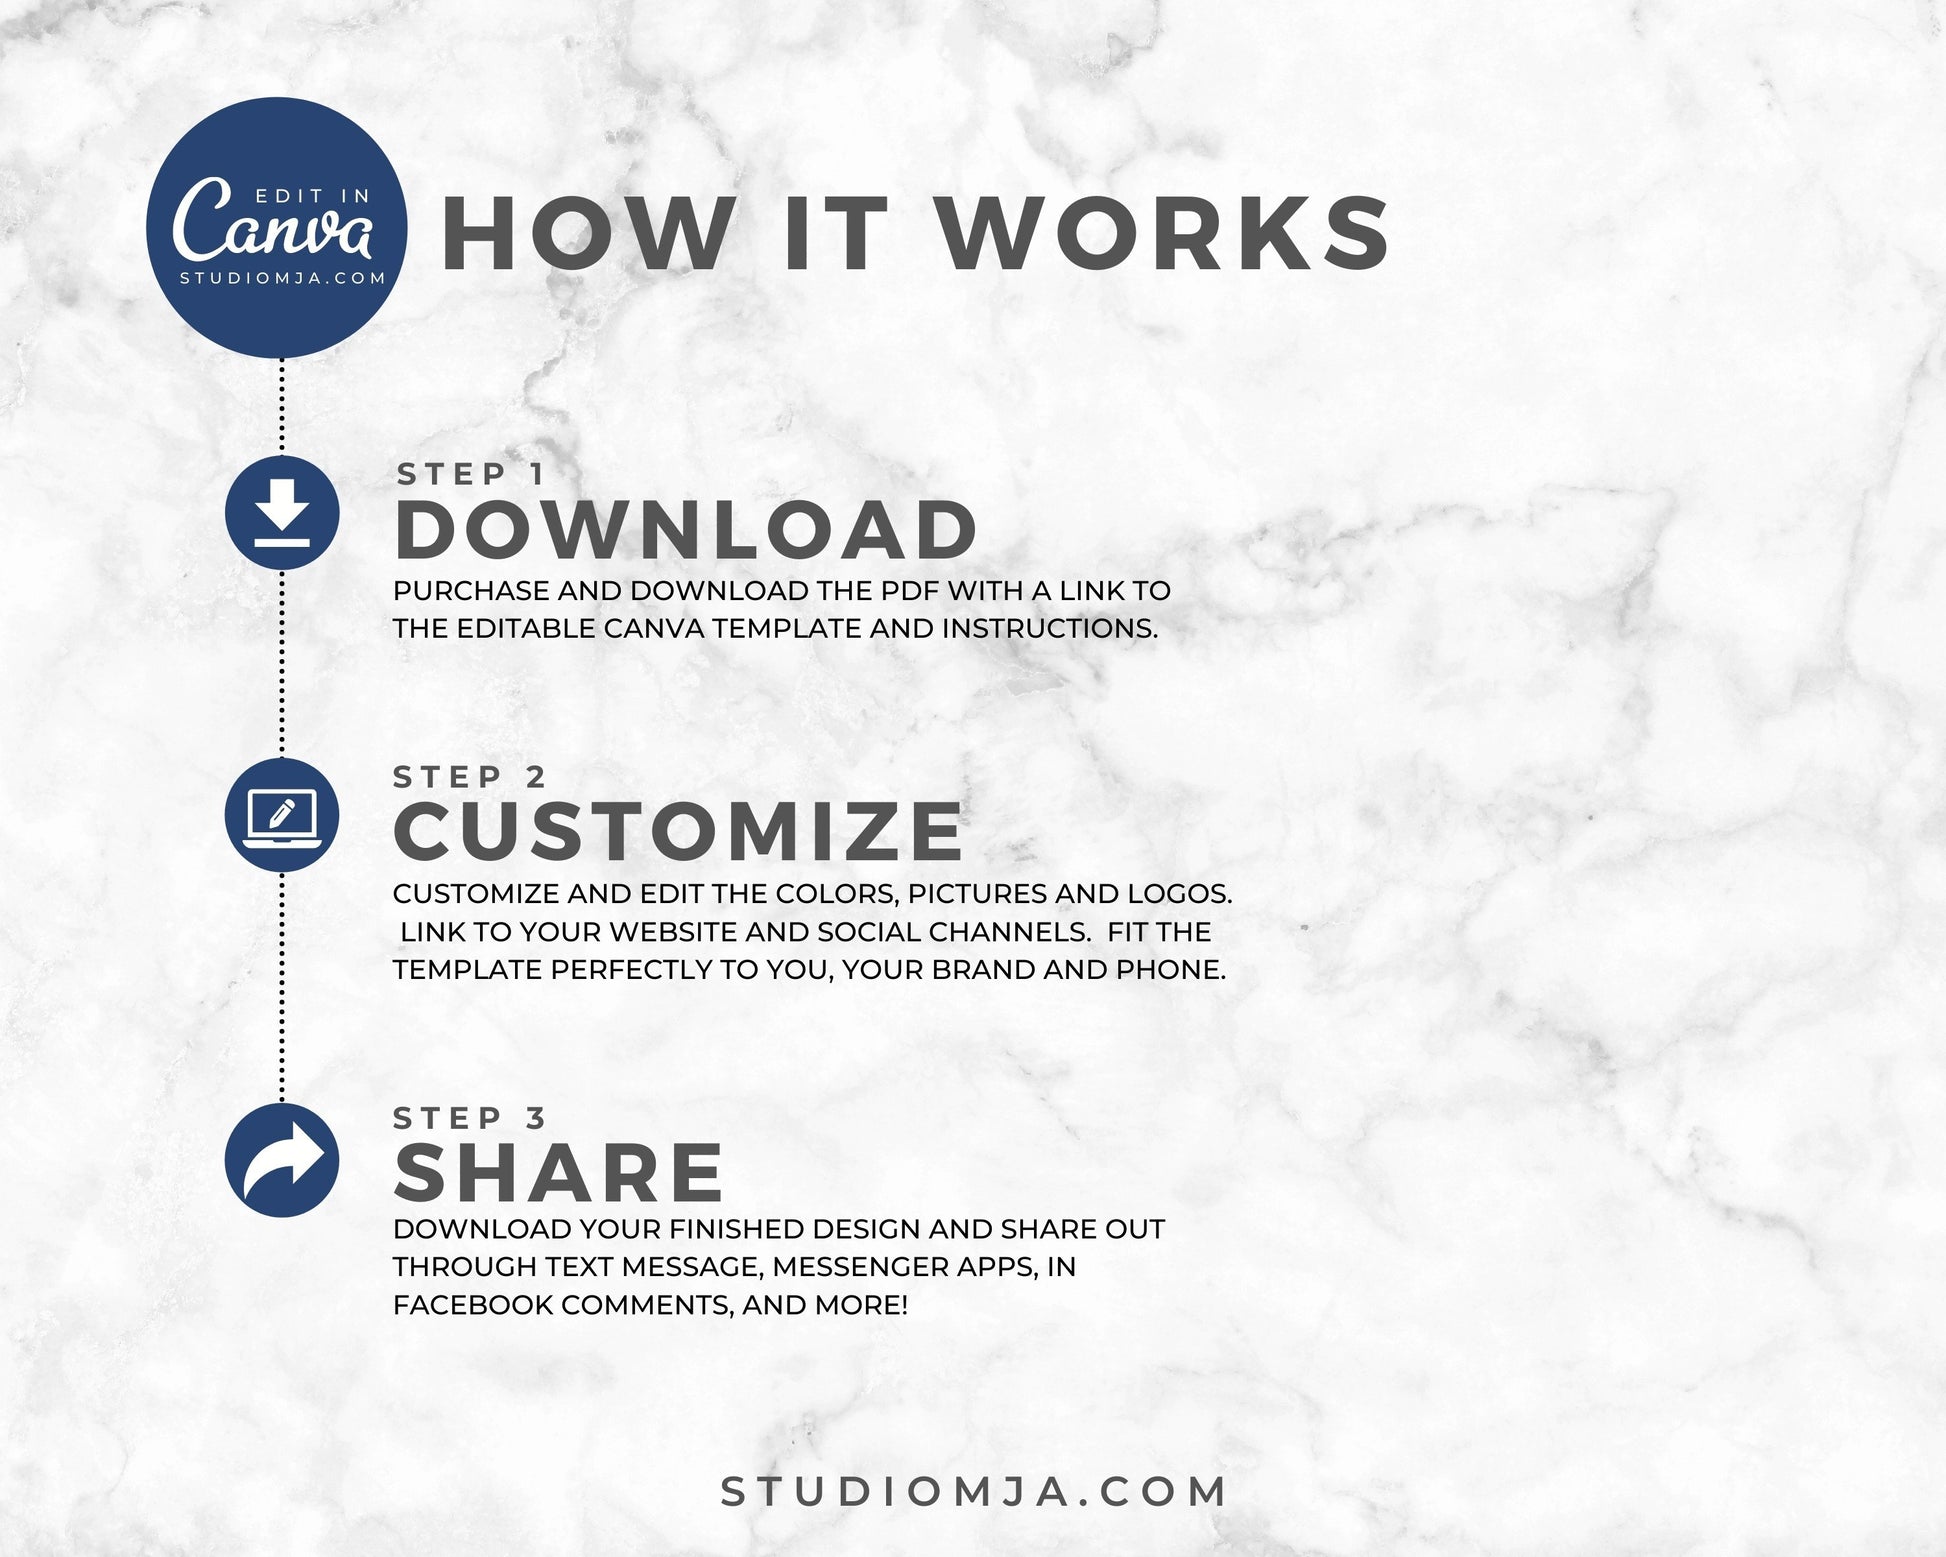 Edit real estate templates in canva how it works instructions.  Download in canva, customize and share.